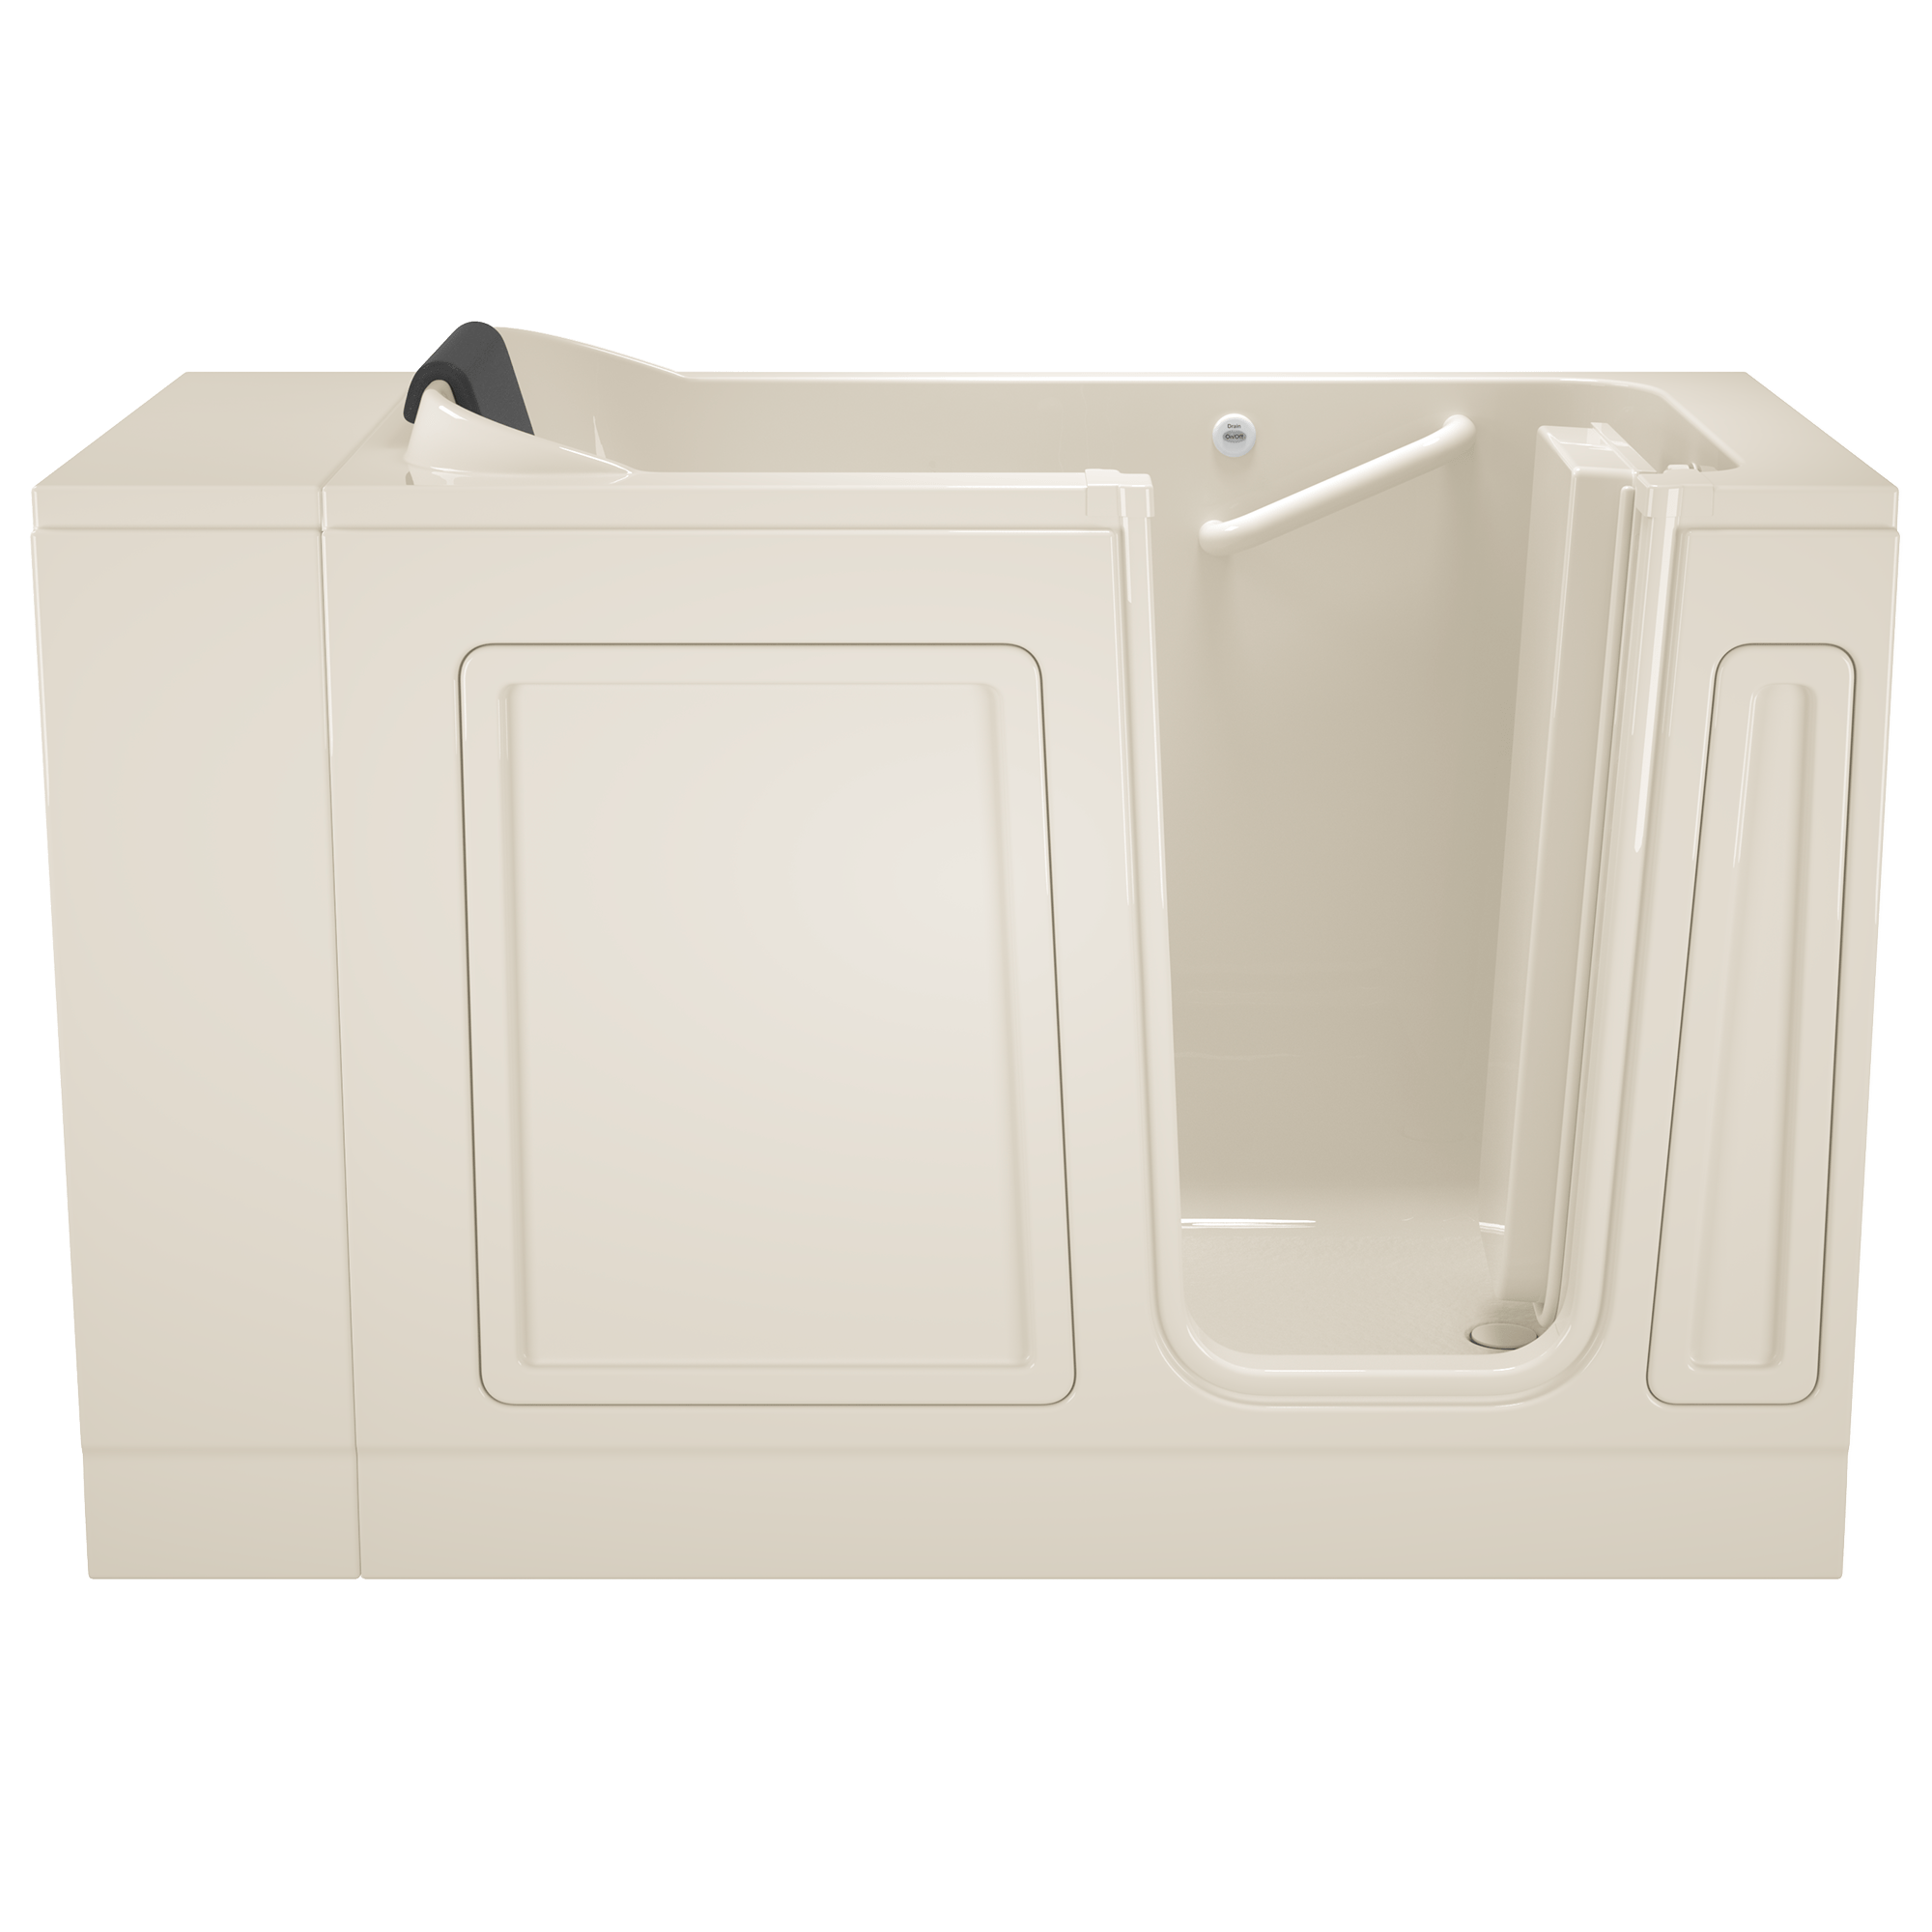 Acrylic Luxury Series 28 x 48 Inch Walk in Tub With Soaker System   Right Hand Drain WIB LINEN